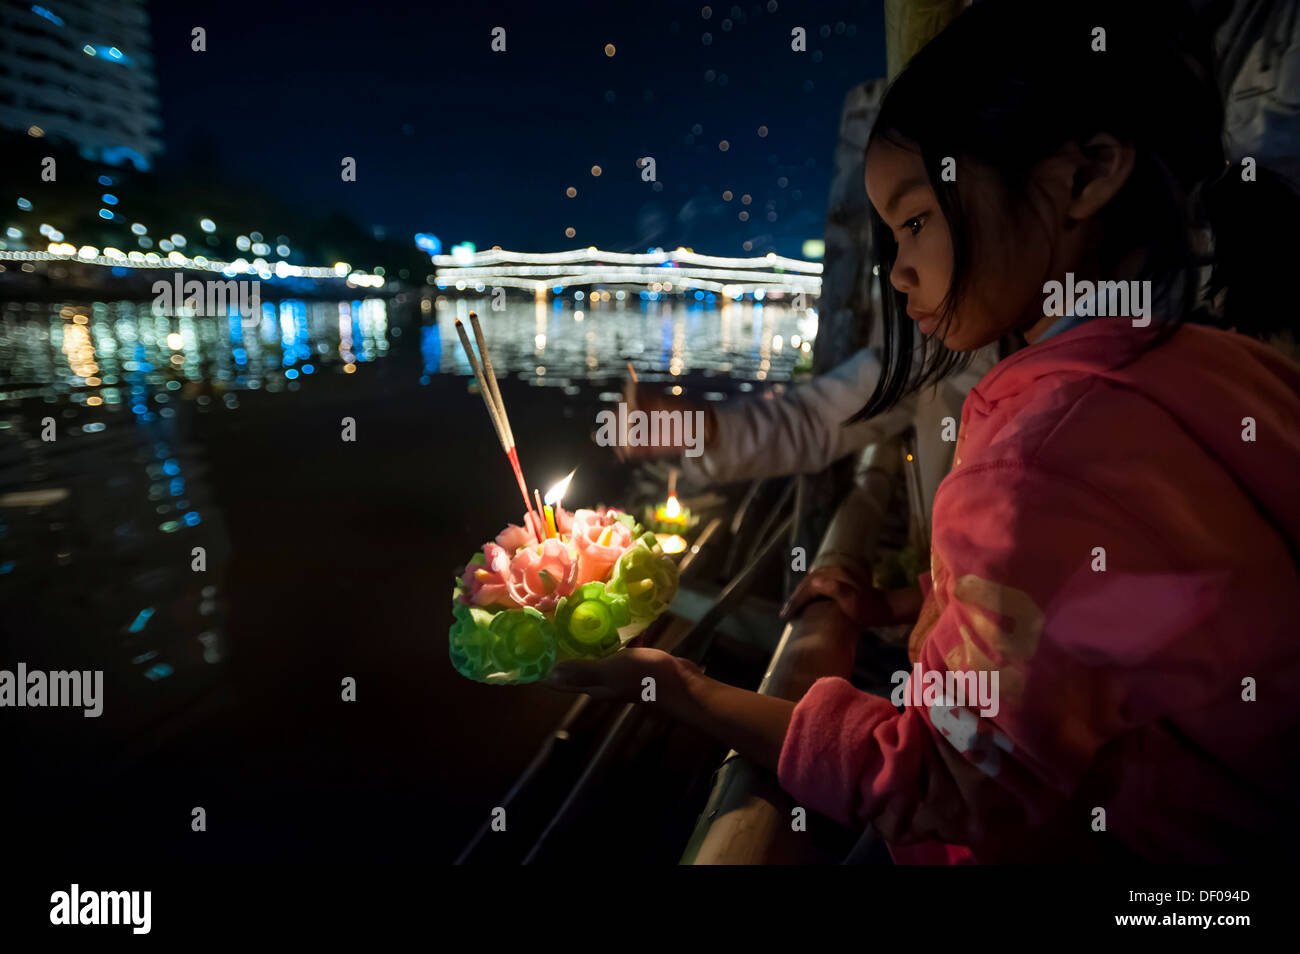 Young girl placing a ceremonial raft in the river, Loi or Loy Krathong Festival, Chiang Mai, Northern Thailand, Thailand, Asia Stock Photo